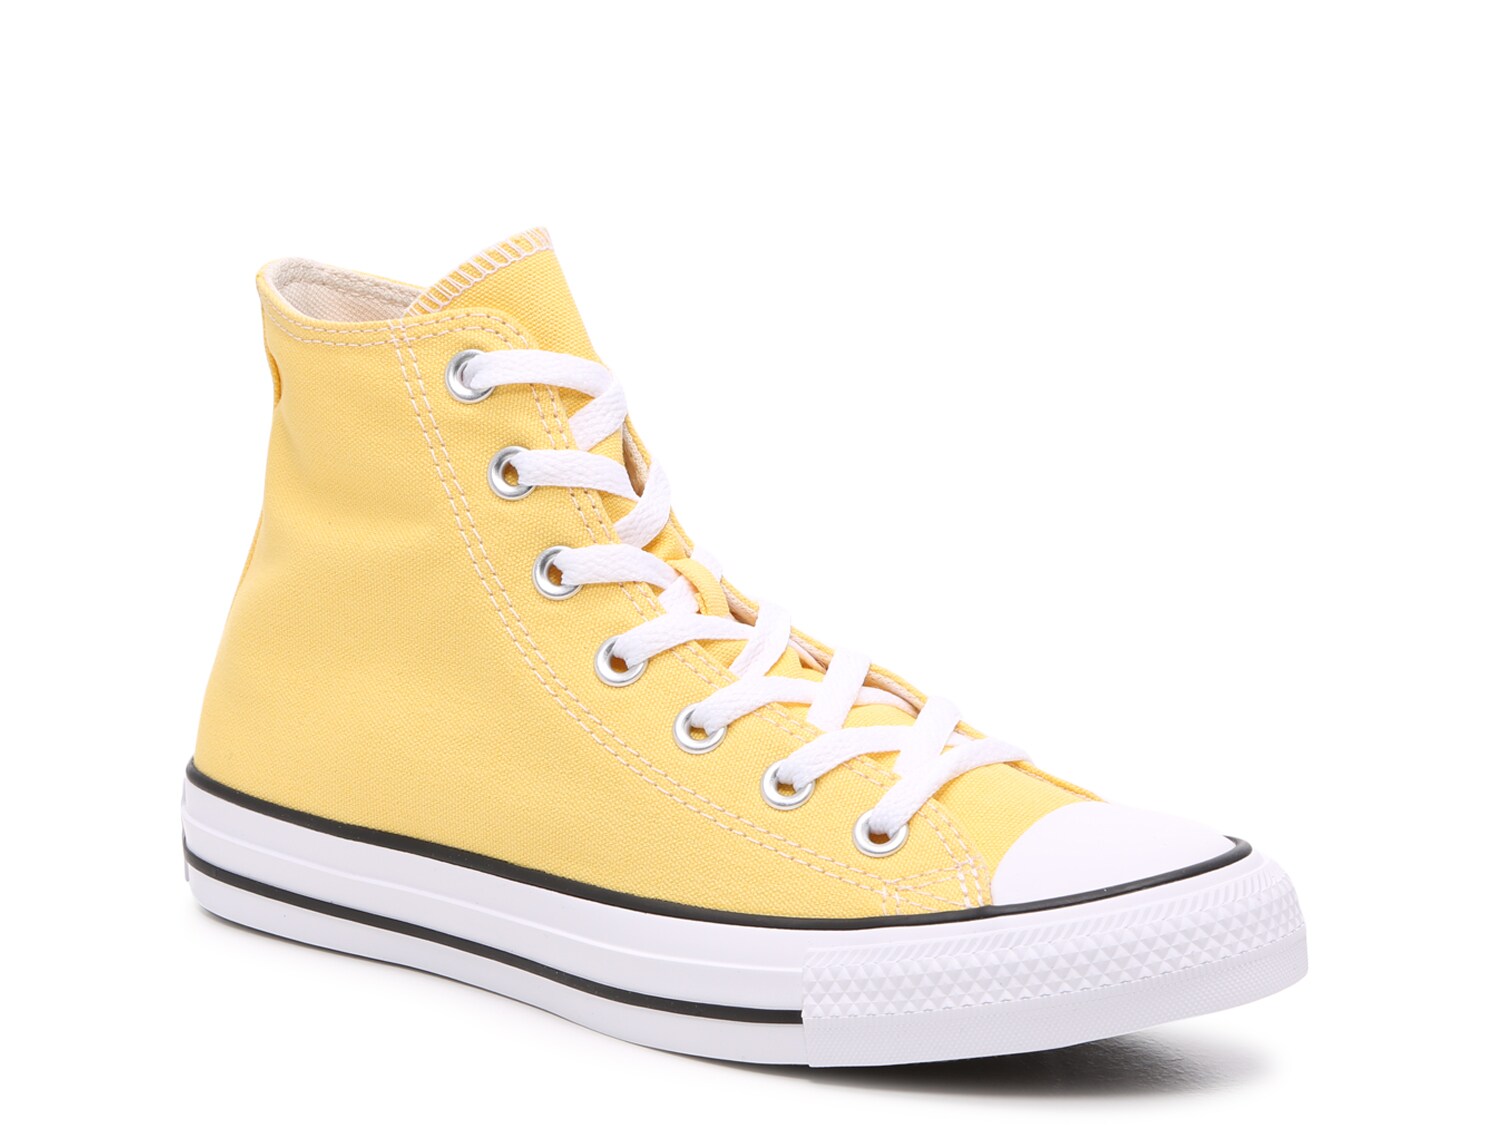 yellow high top tennis shoes